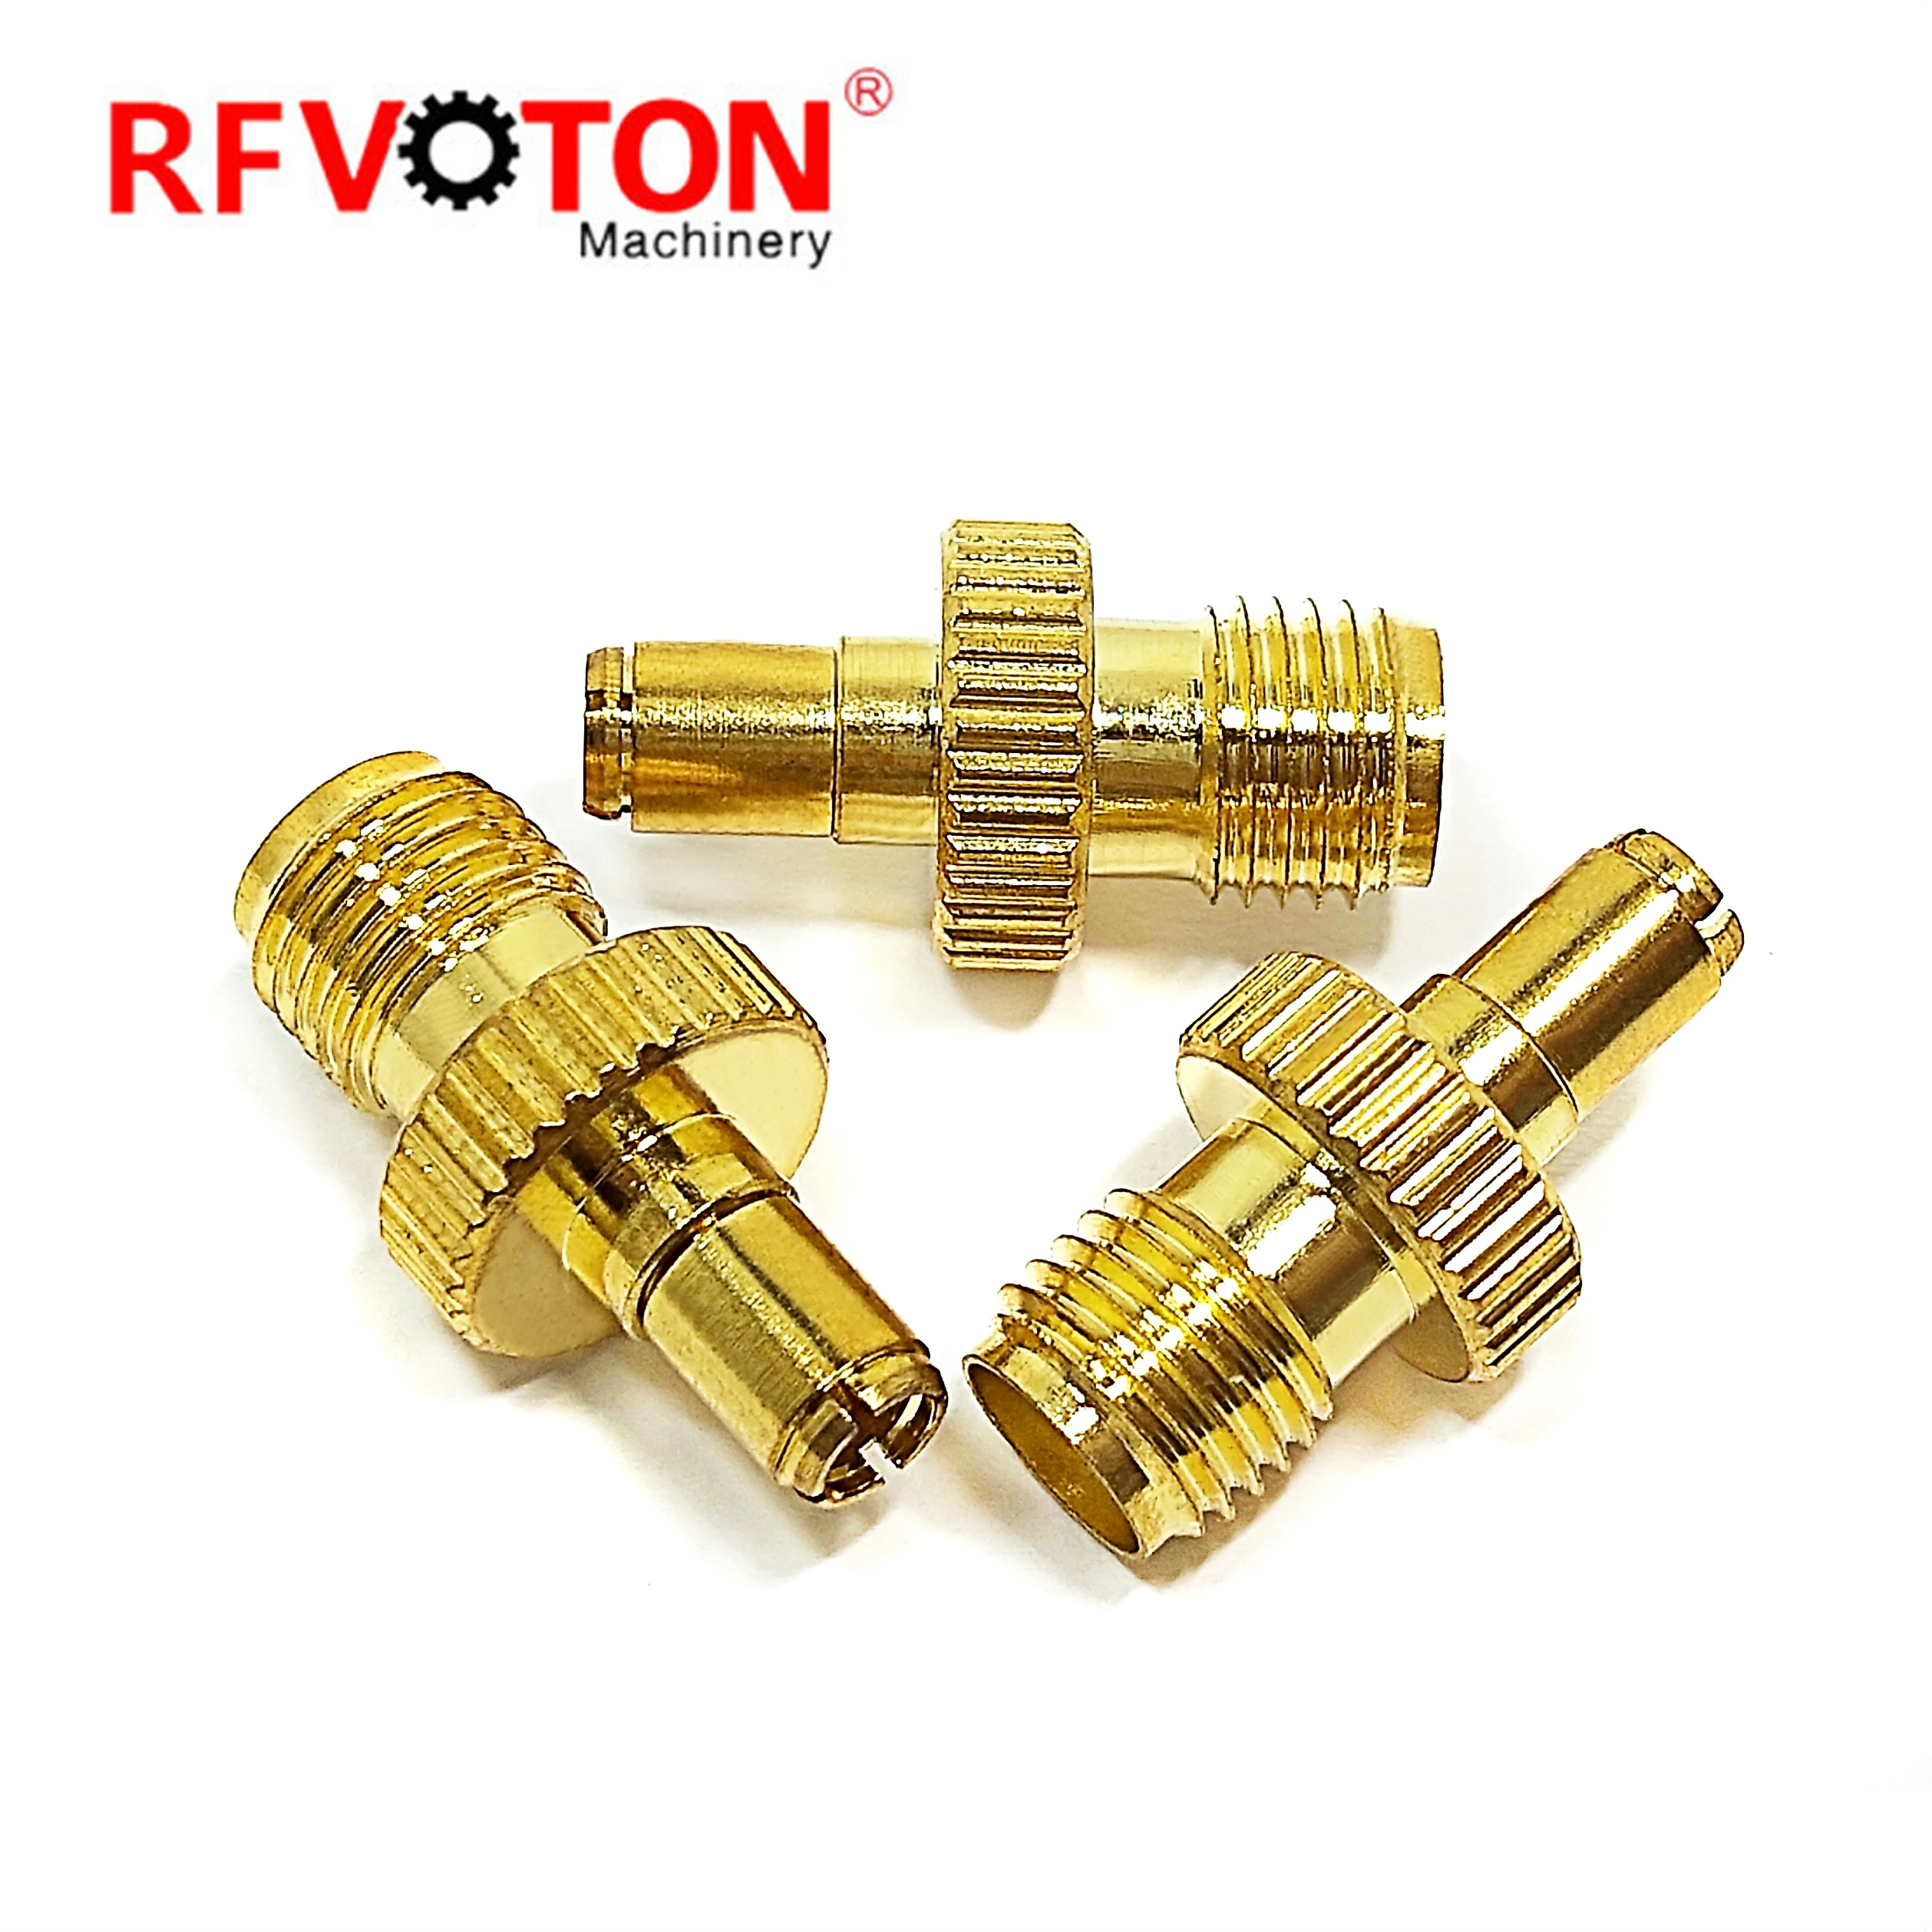 Factory directly Wholesale RF Adaptor SMA Female Jack To TS9 Male Plug RF Coax Coaxial Adapter RF Converter supplier